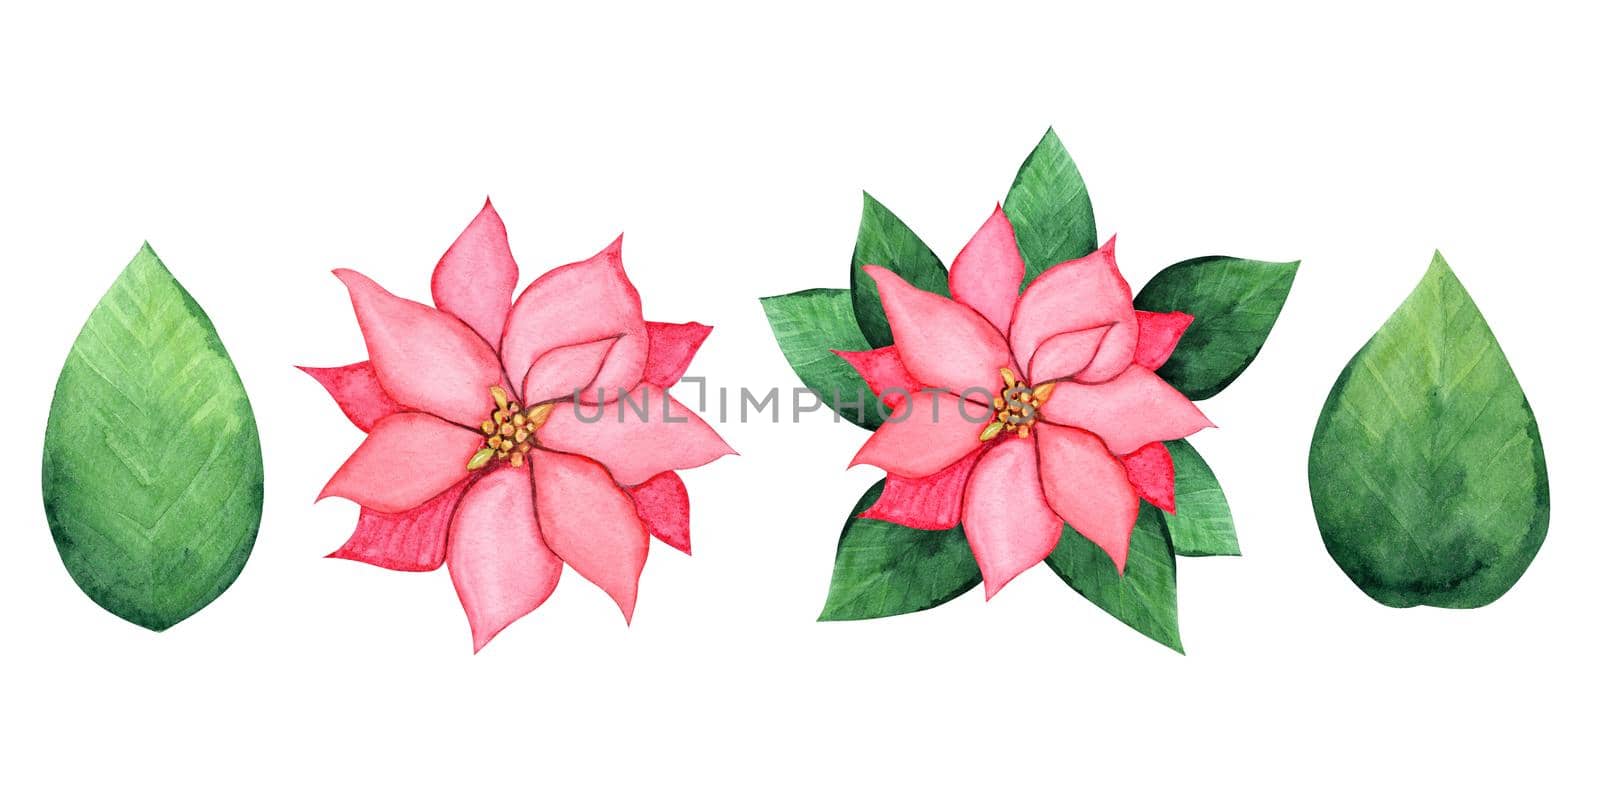 Watercolor poinsettia set isolated on white background by dreamloud